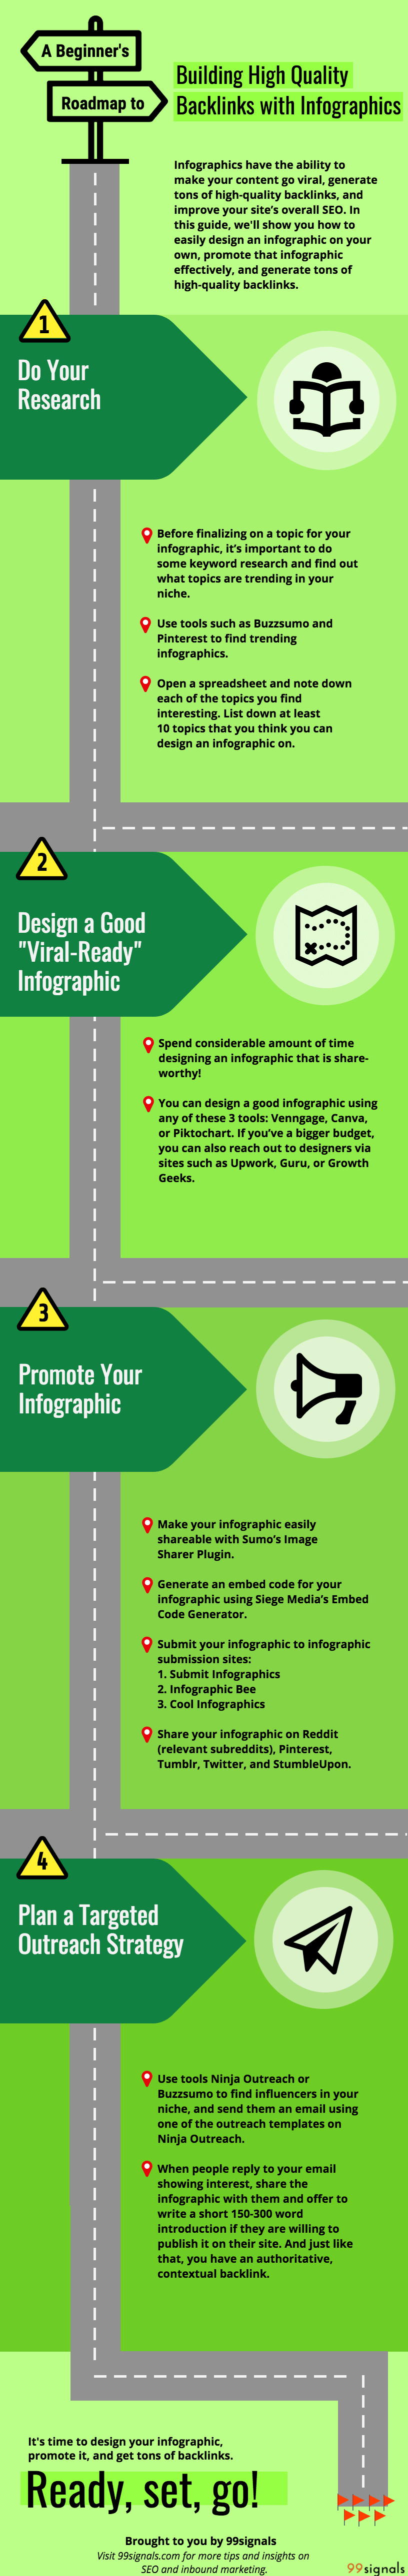 Infographic: A Beginner's Roadmap to Building High Quality Backlinks with Infographics